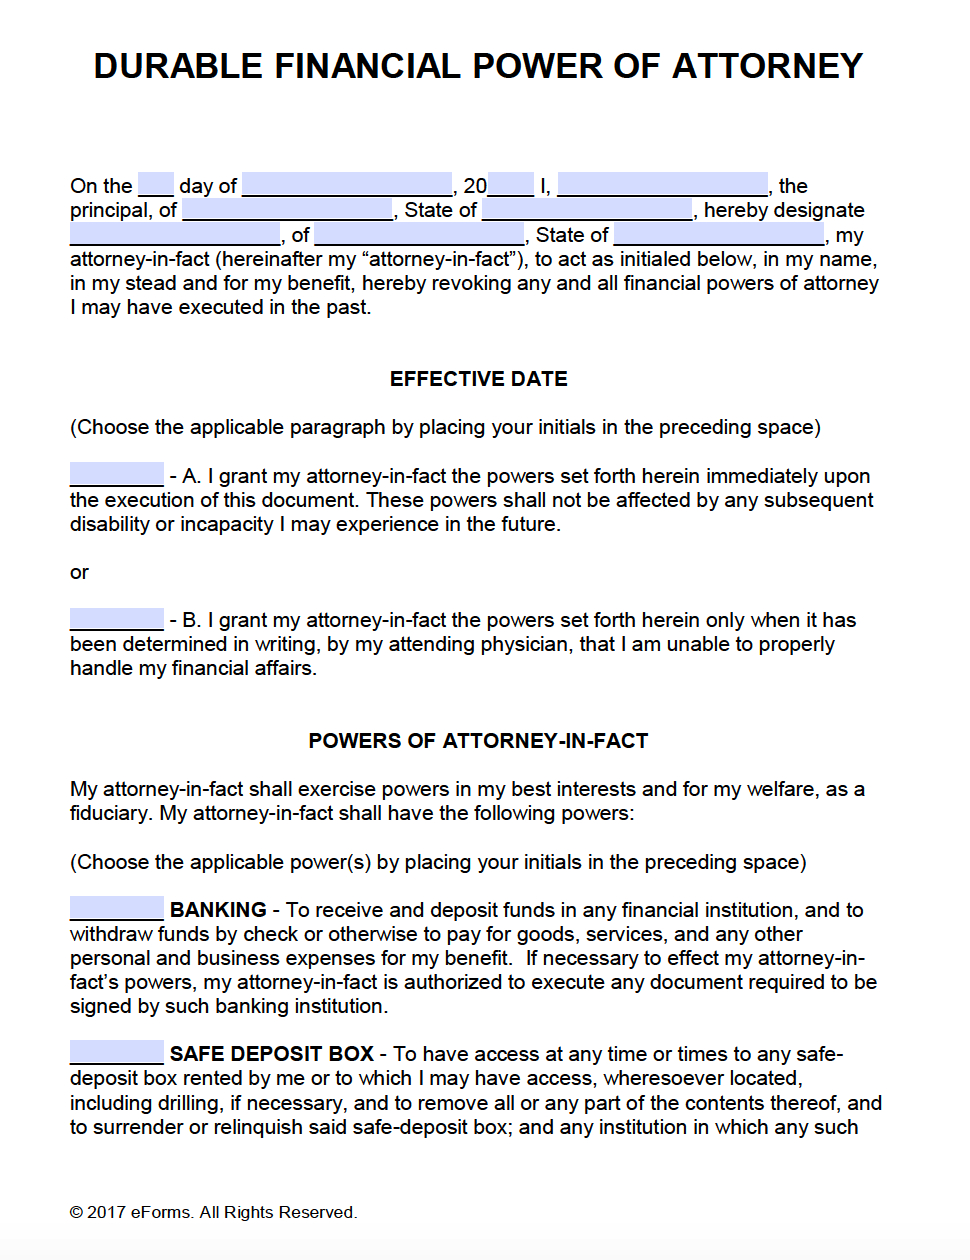 Free Printable Durable Power Of Attorney Forms - Free Printable Power Of Attorney Forms Online